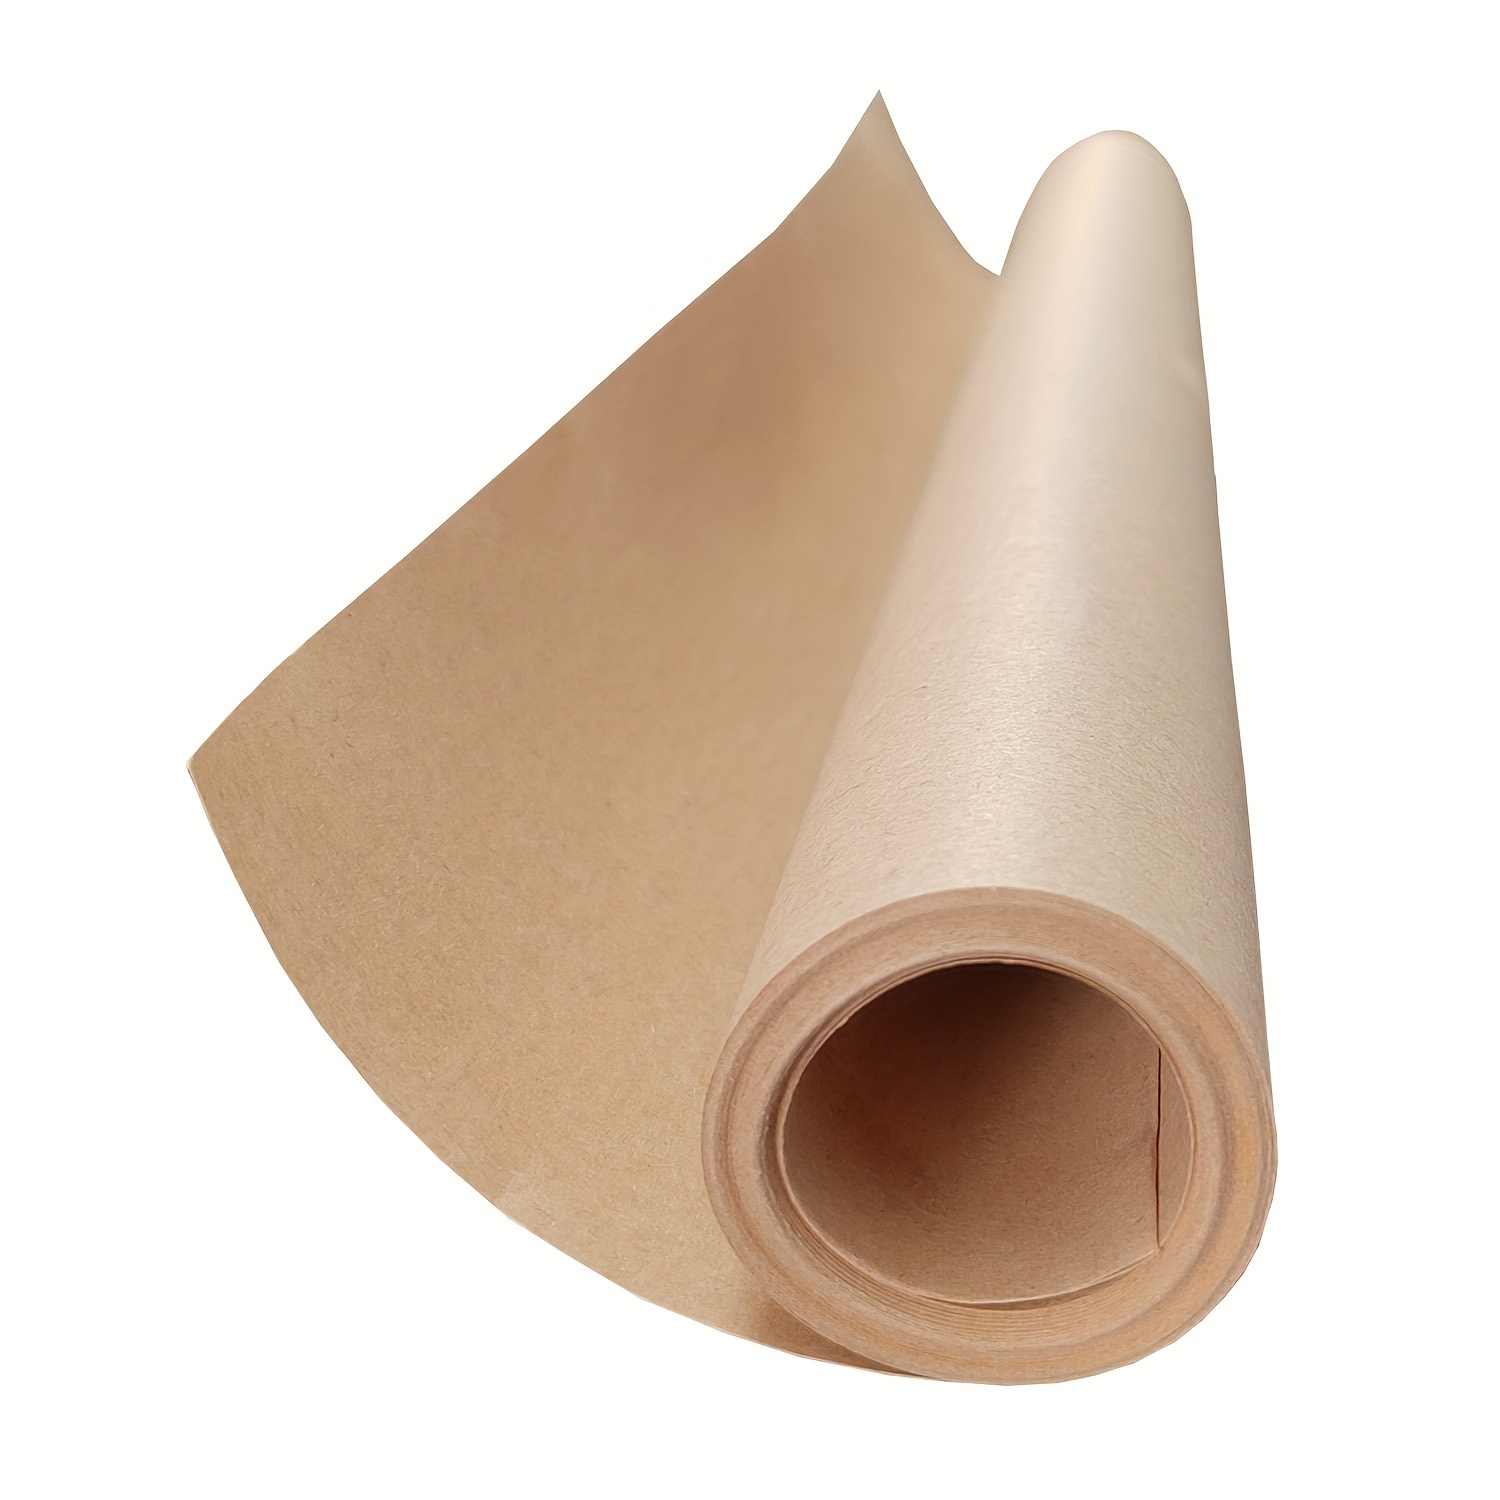 Kraft Paper Roll for Gift Wrapping, Moving, Packing, Plain Brown Shipping  Paper for Crafts, Postal, Table Runner, Bulletin Board Easel (10 x 1200  Inches, 100 Feet)